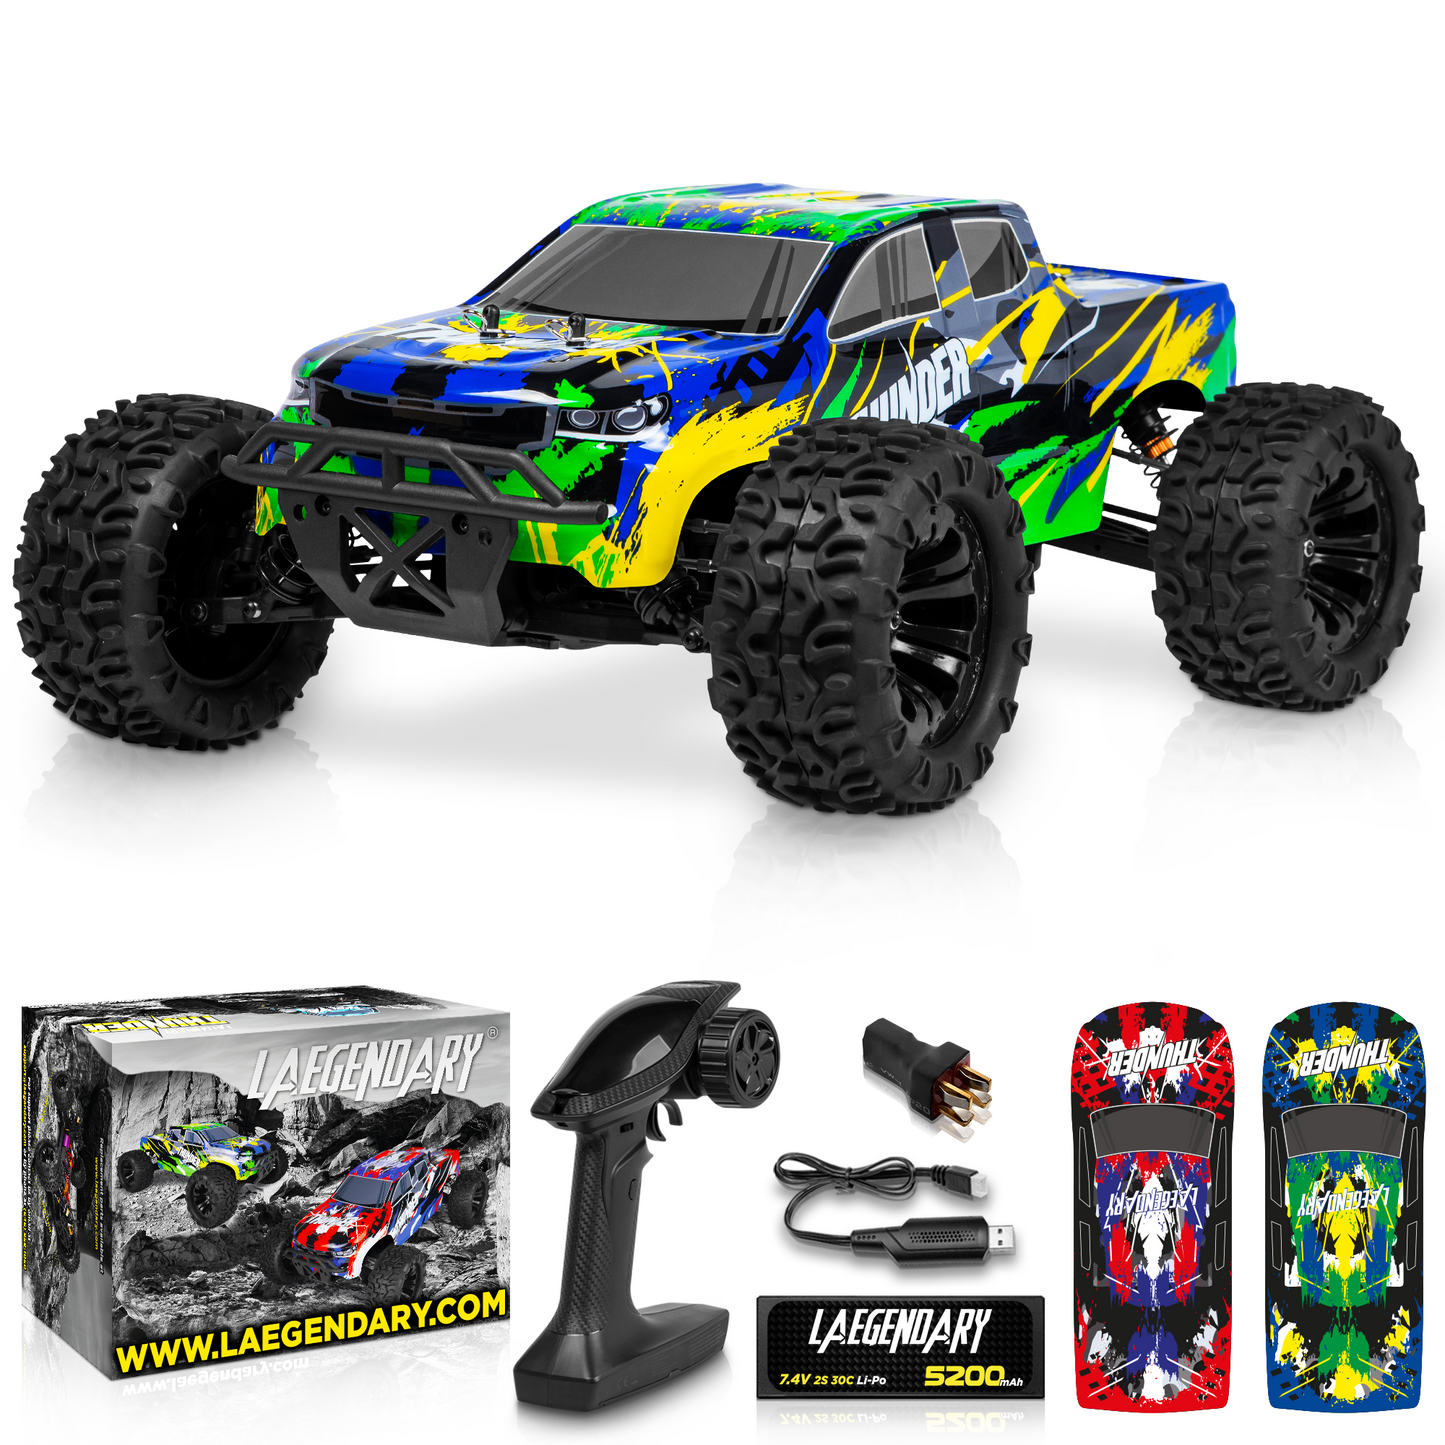 THUNDER 1:10 Scale RC Car 40+ MPH Brushless